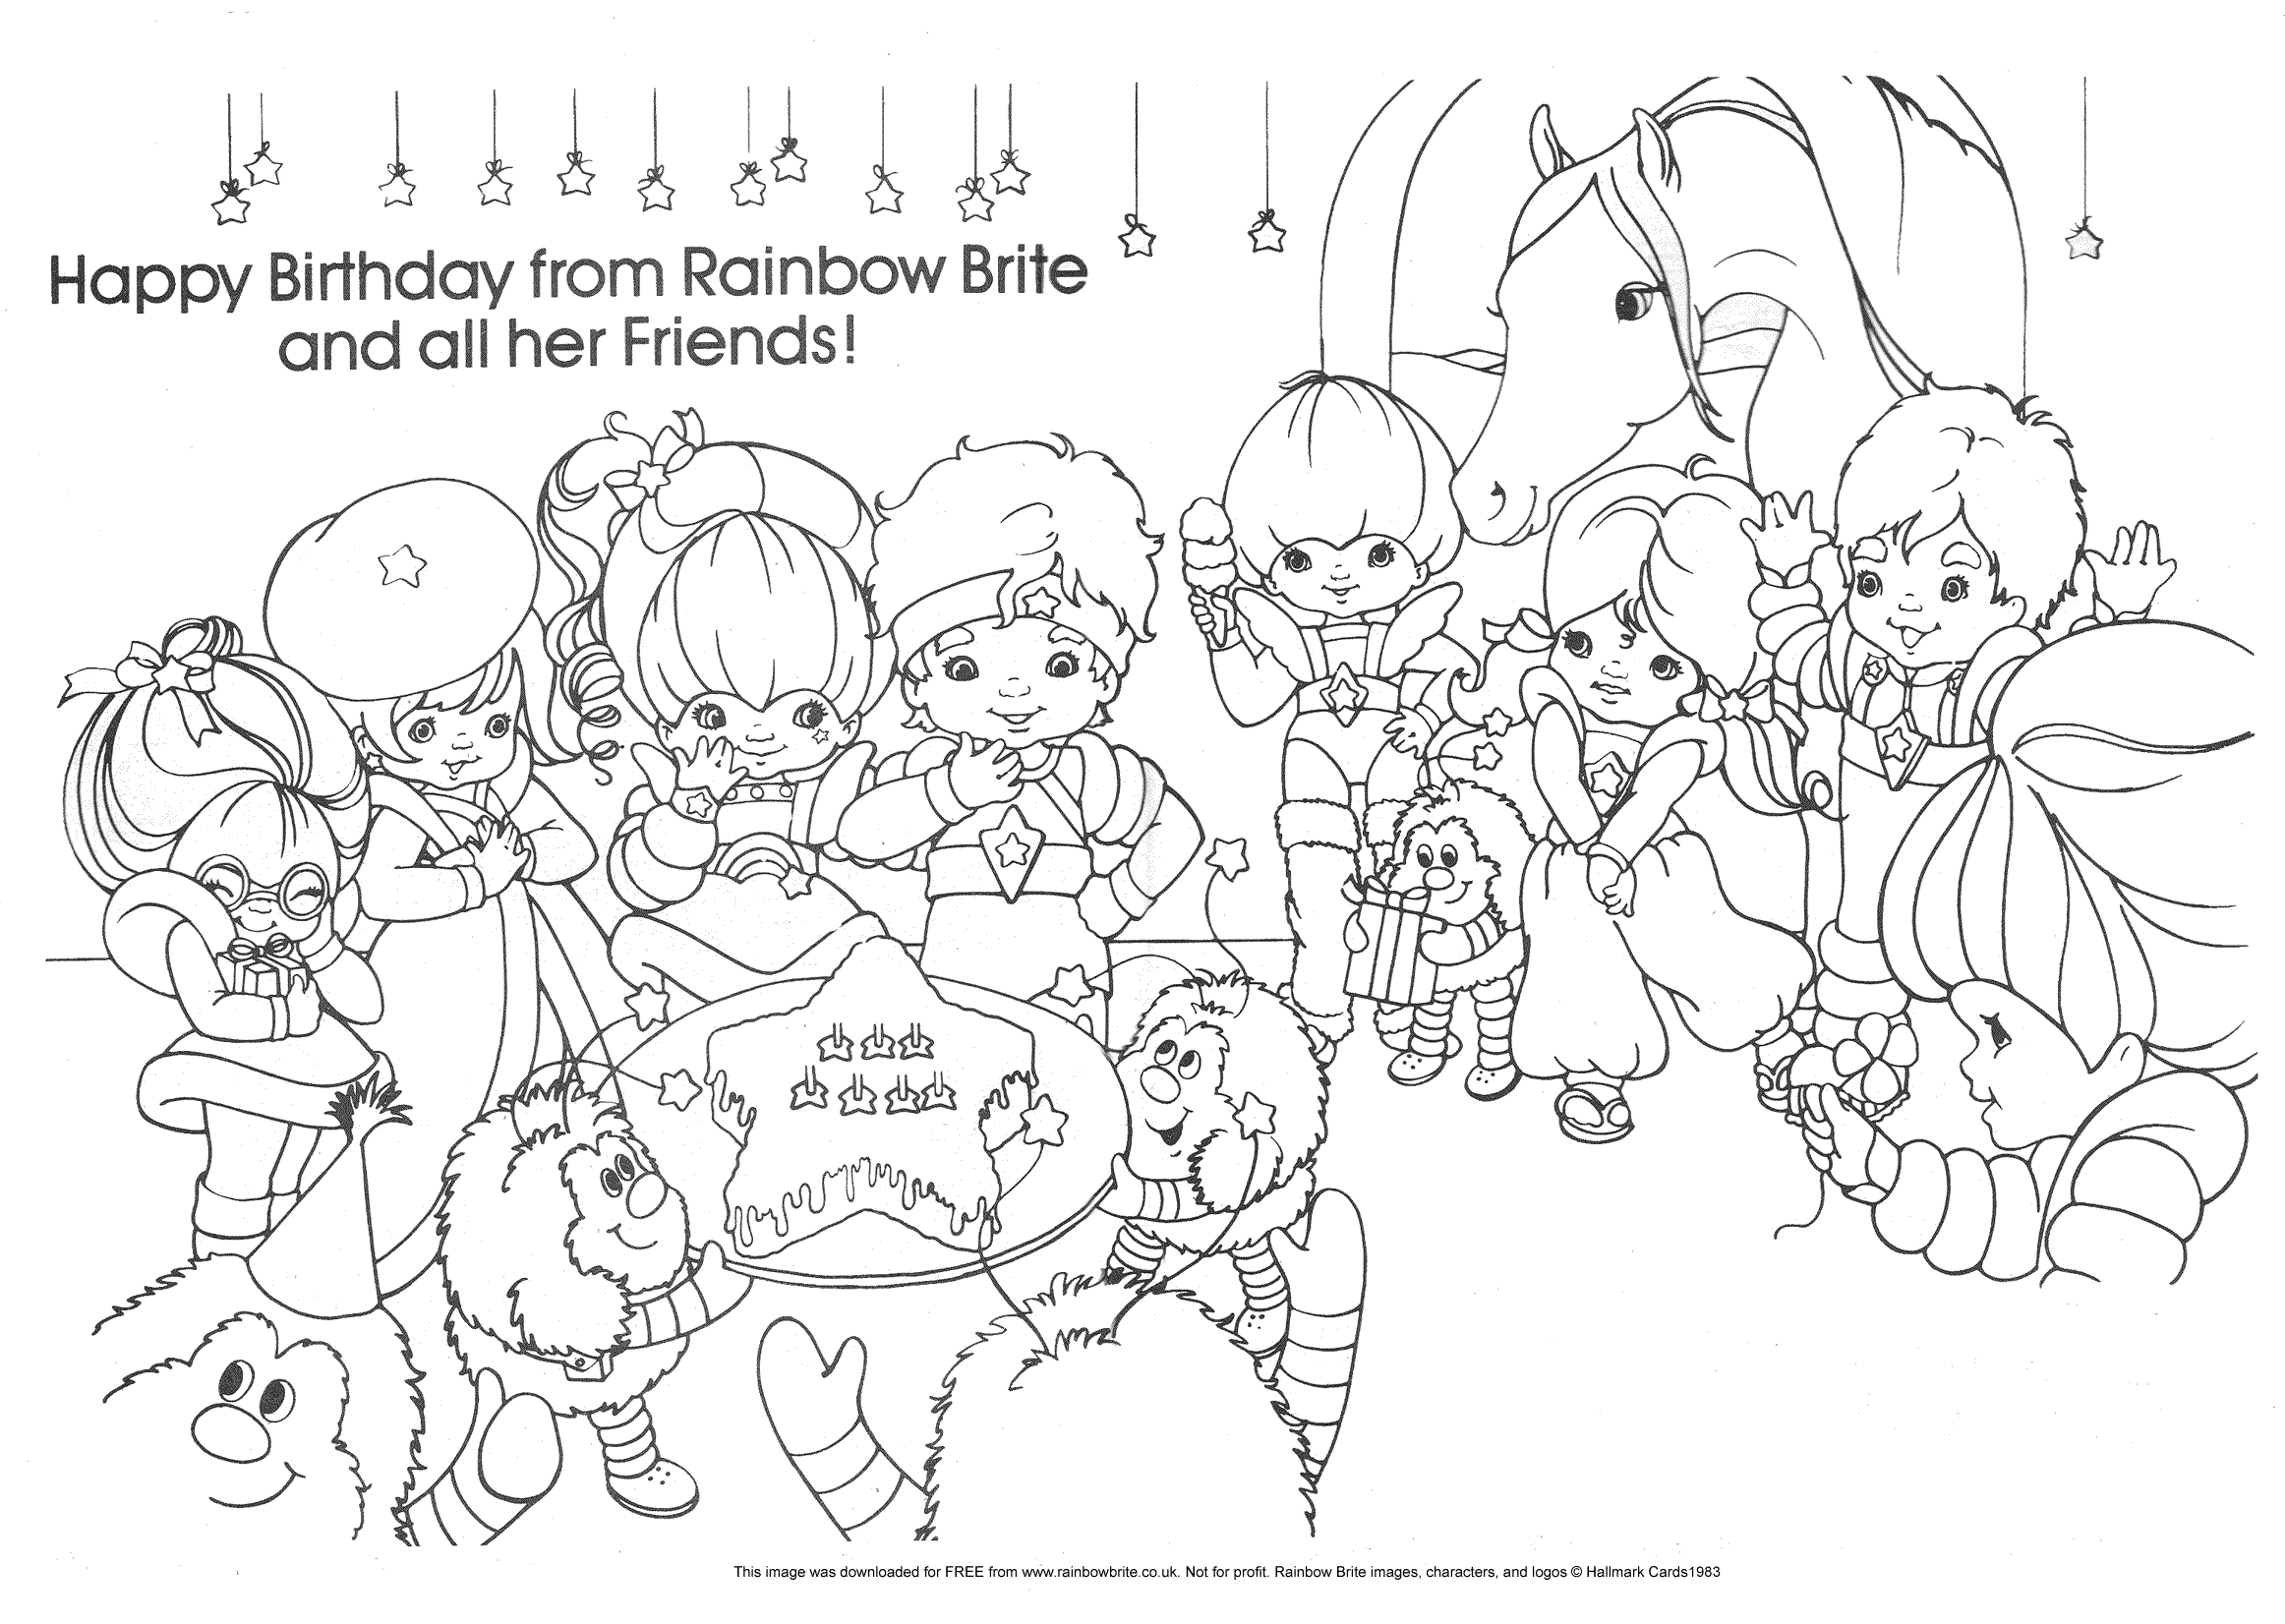 rainbow-brite-coloring-pages-to-download-and-print-for-free